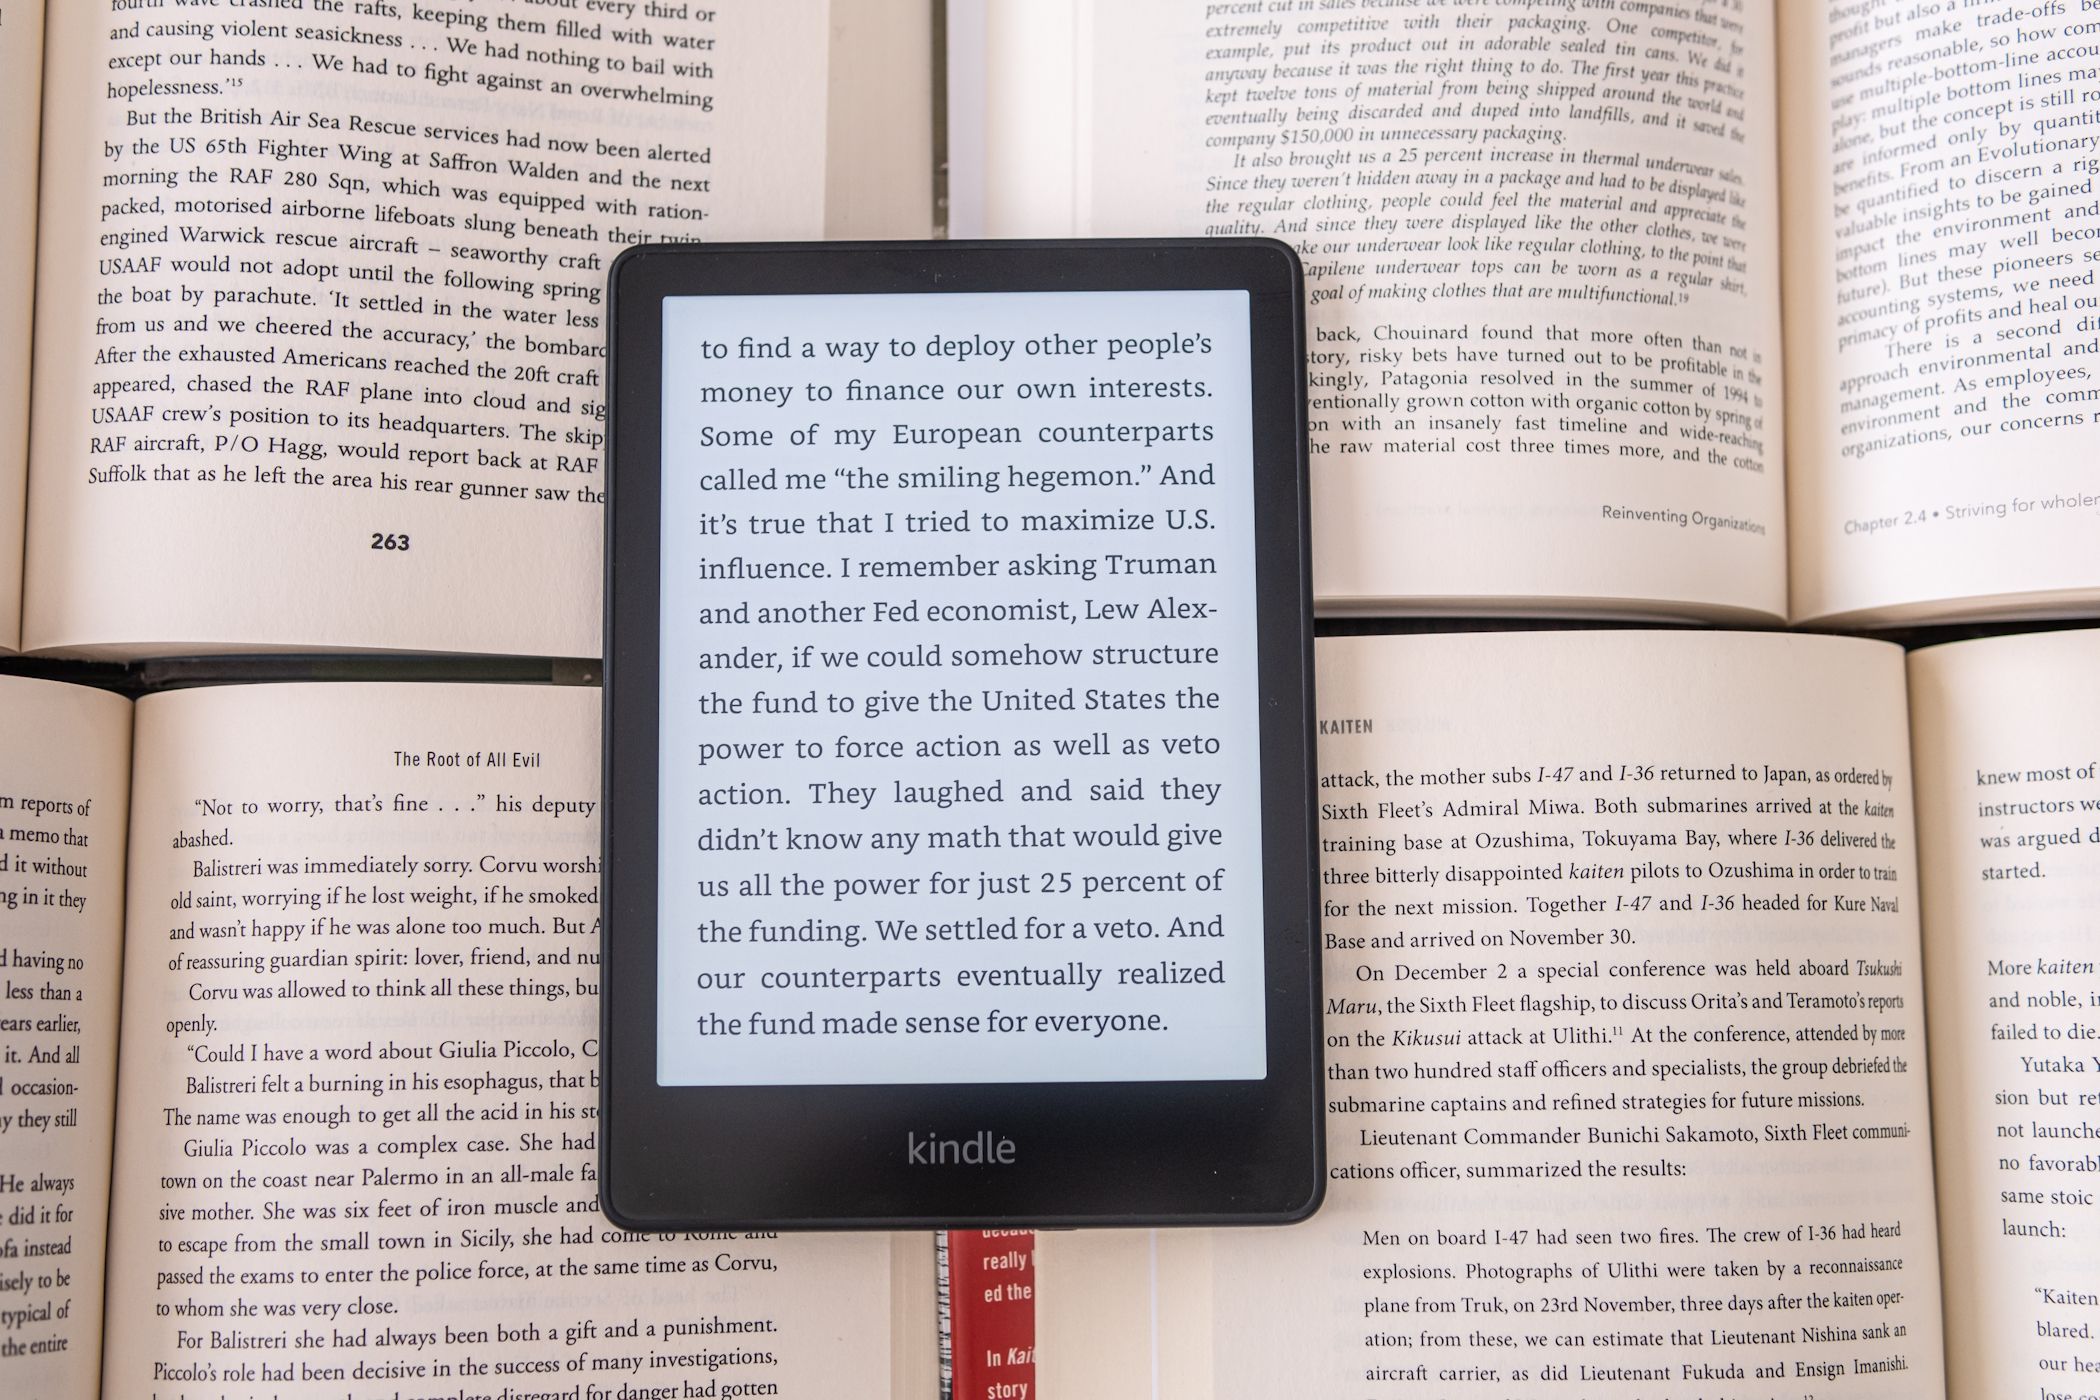 kindle ereader on pile of open books displaying text